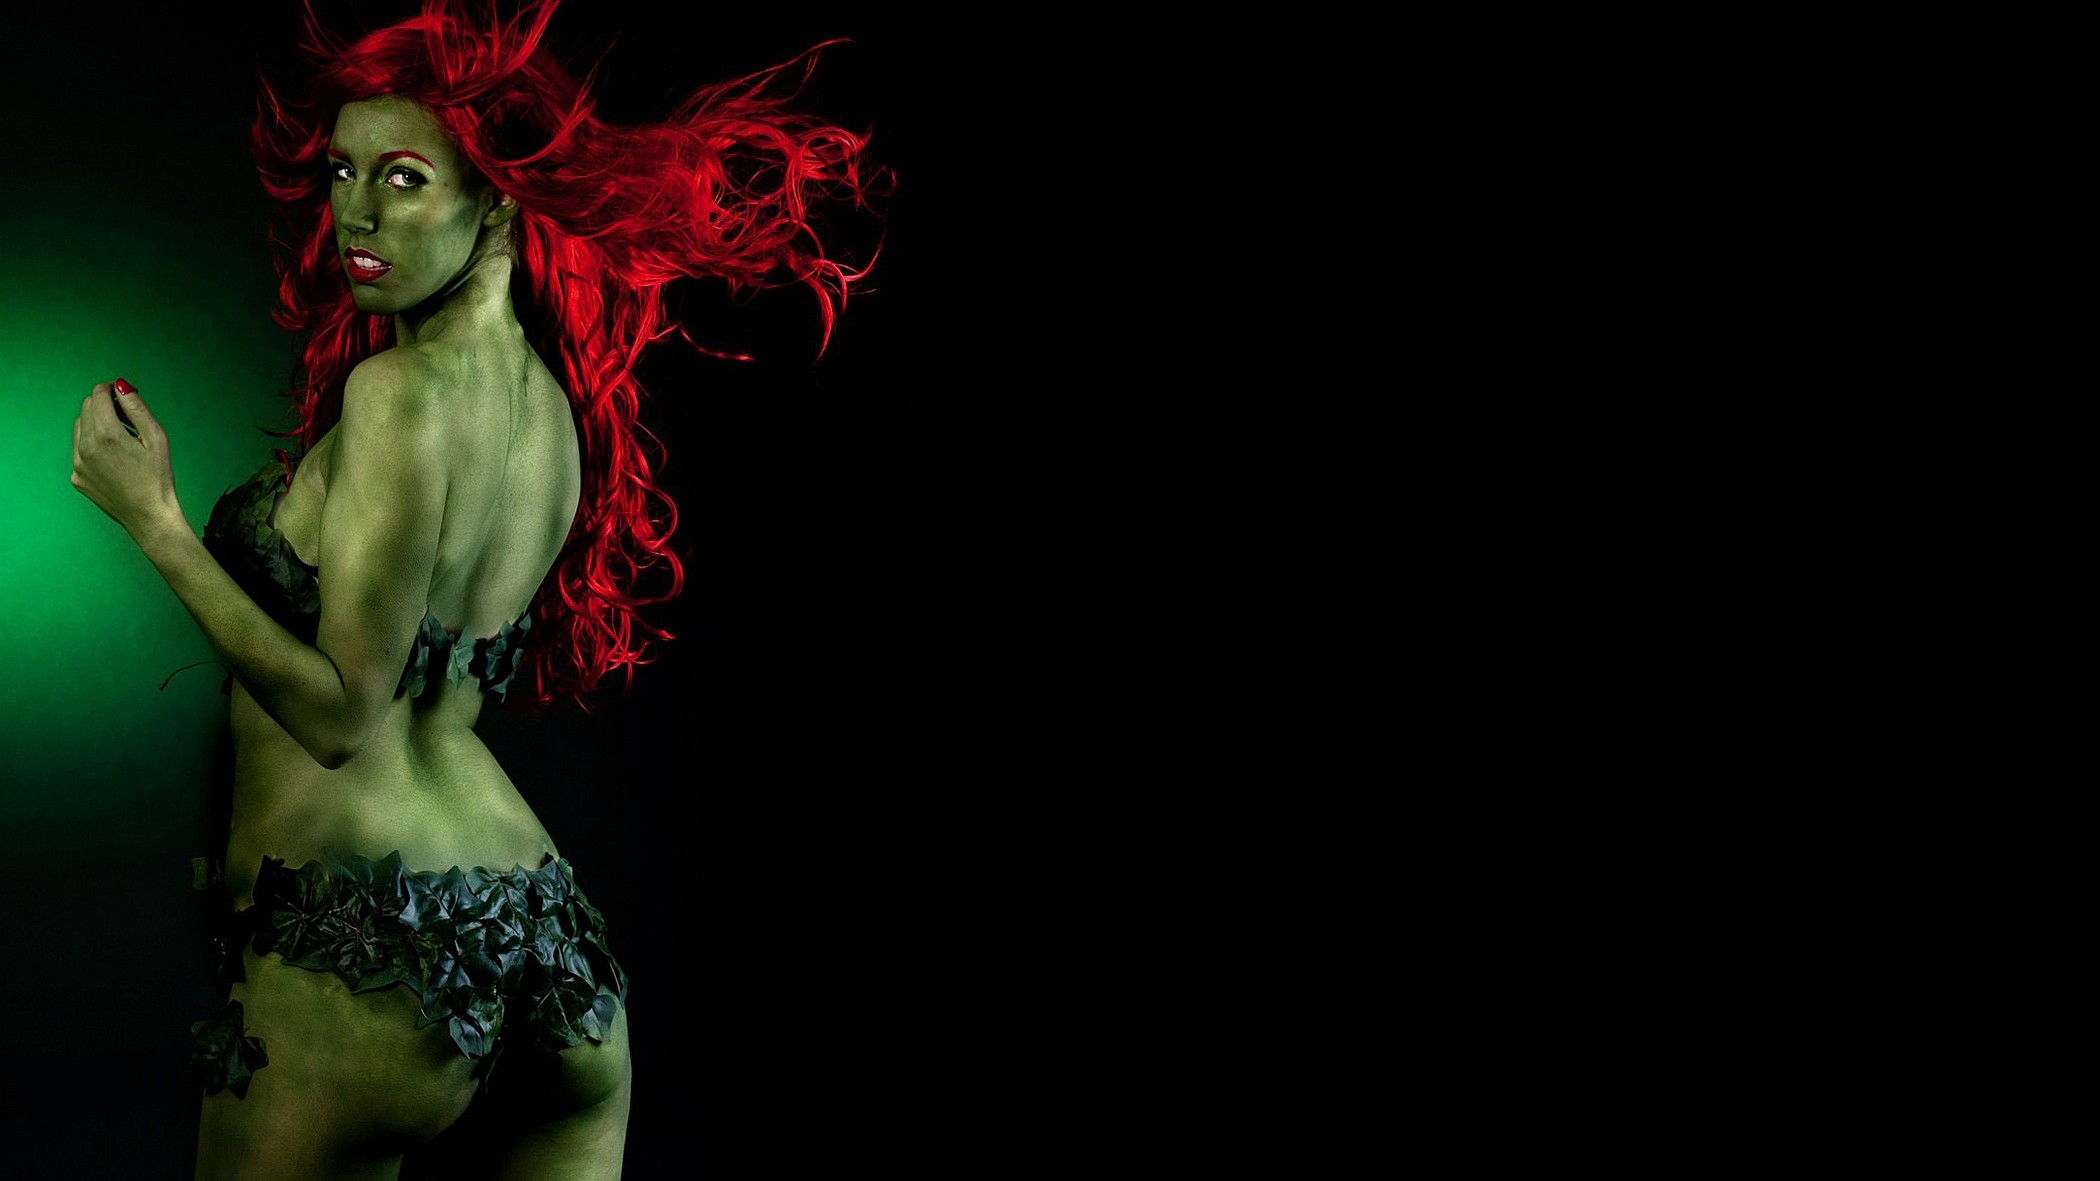 2100x1181 ... cosplay poison ivy full hd drop dead gorgeous wallpaper free ...